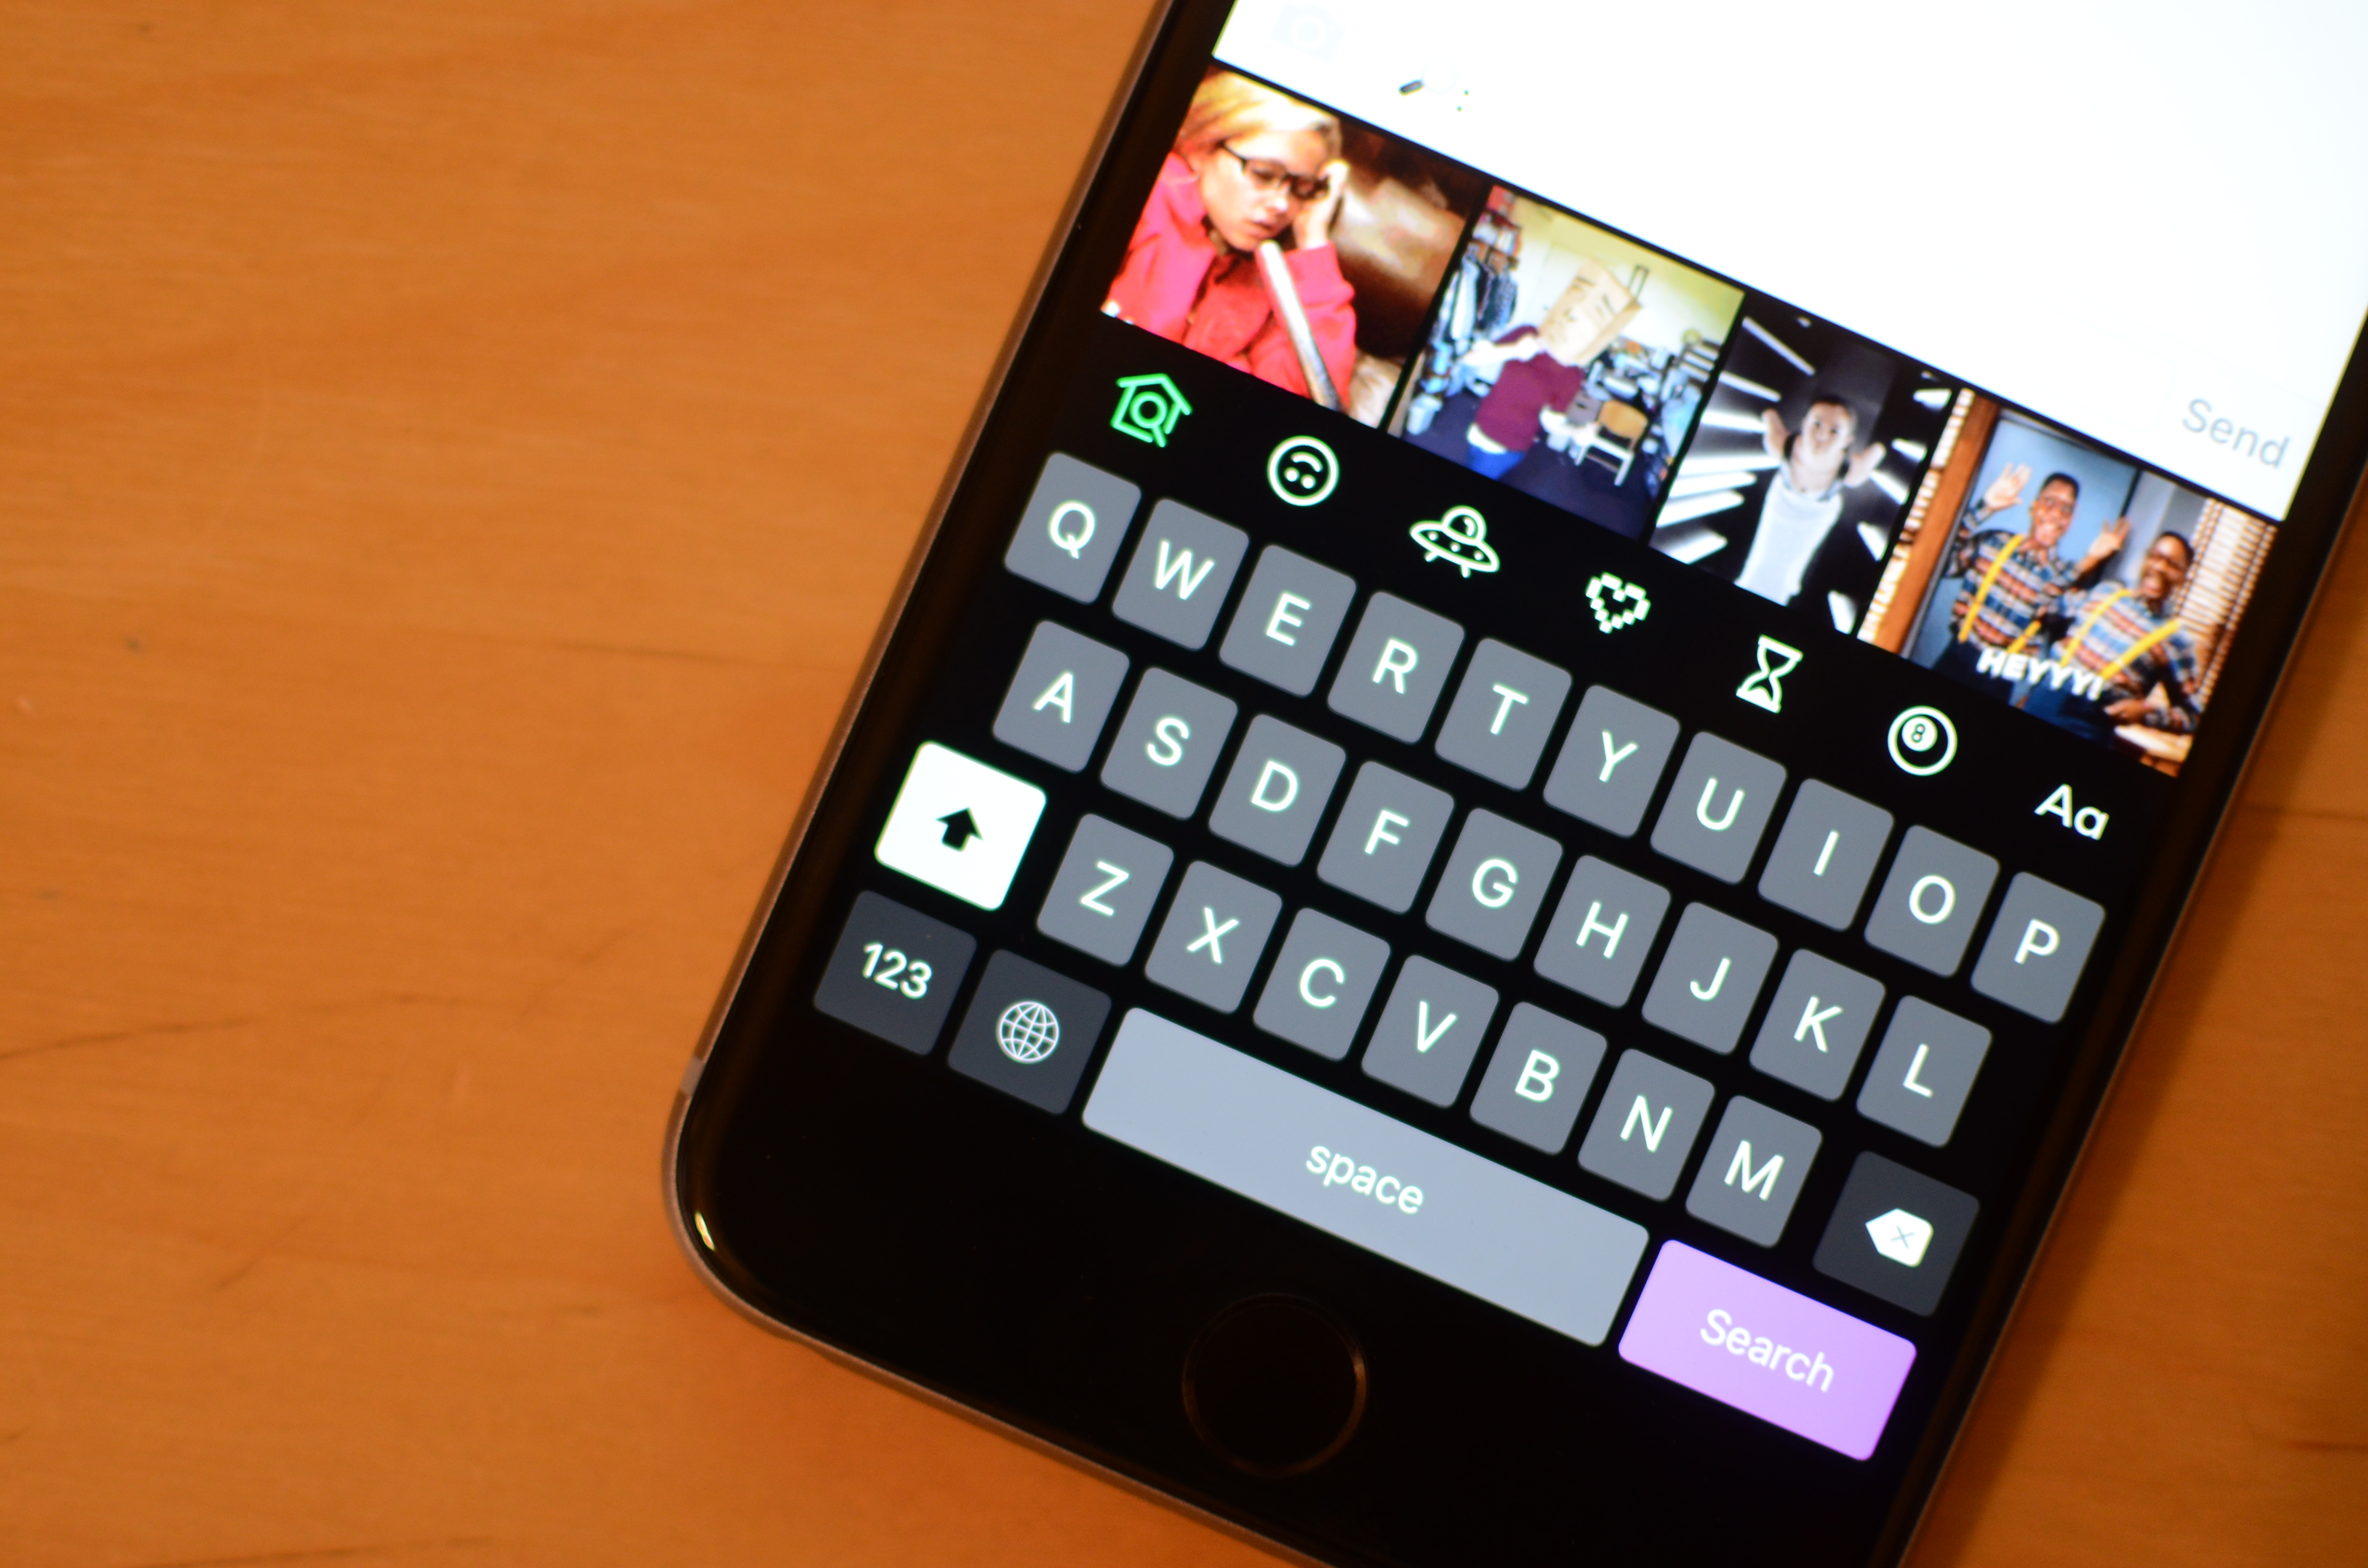 Now You Can Create GIFs App-Free with Giphy's Online GIF Maker